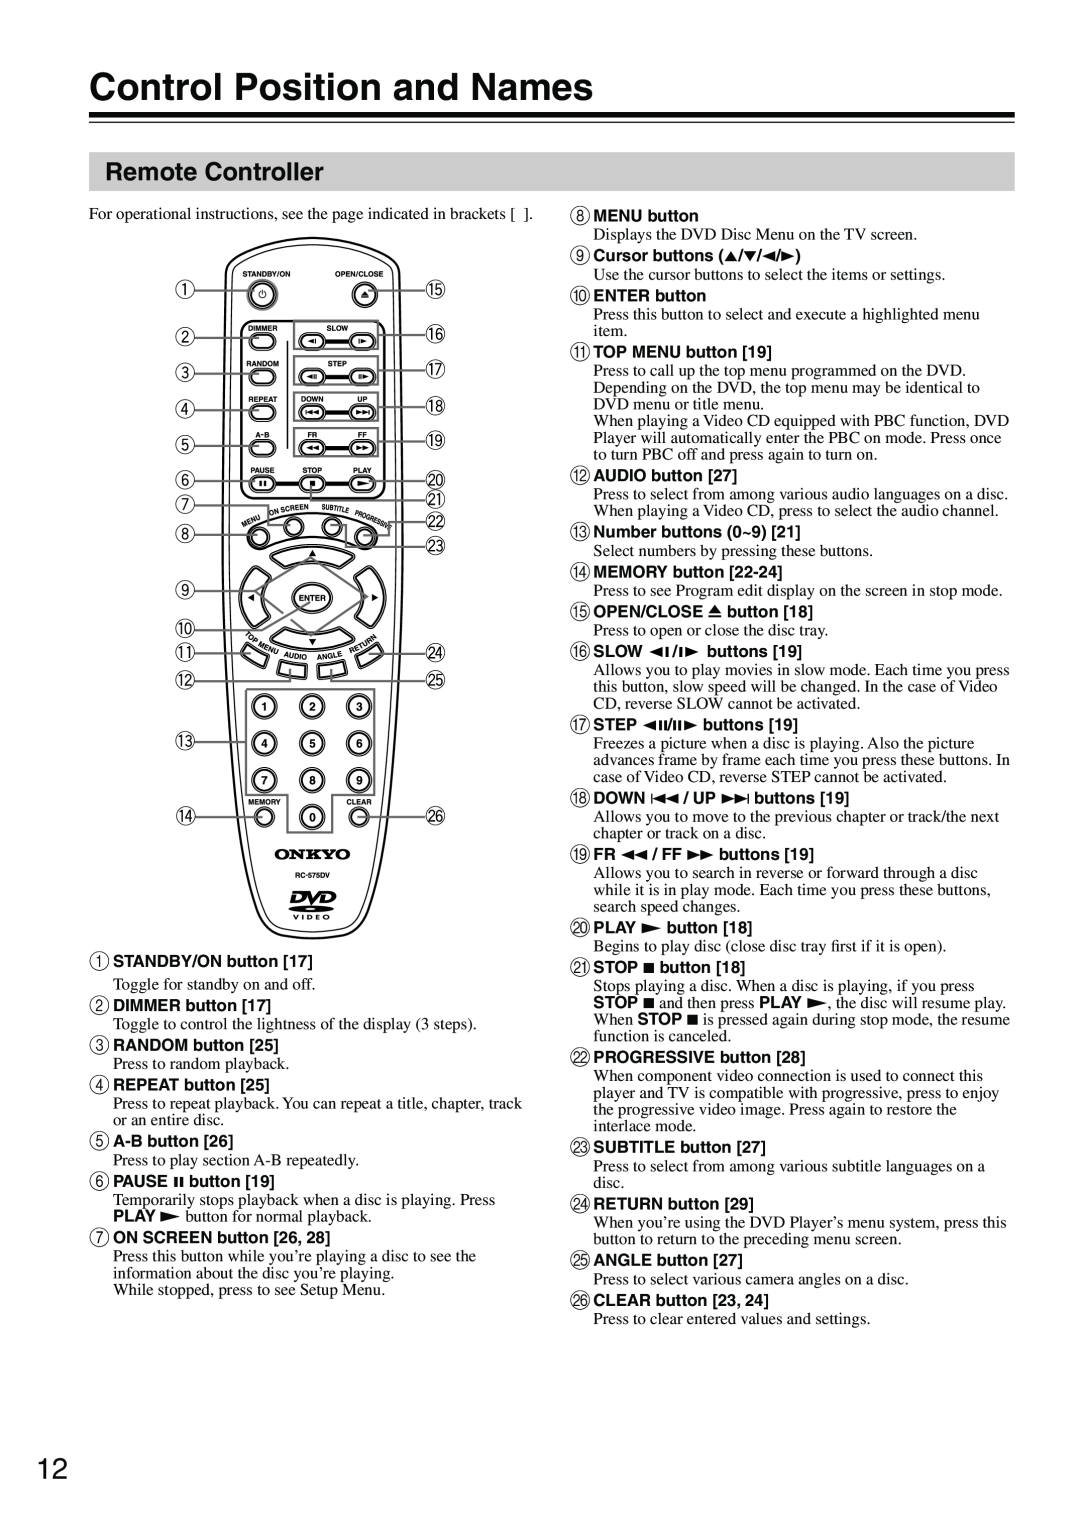 Onkyo DV-SP302 instruction manual Control Position and Names, Remote Controller 